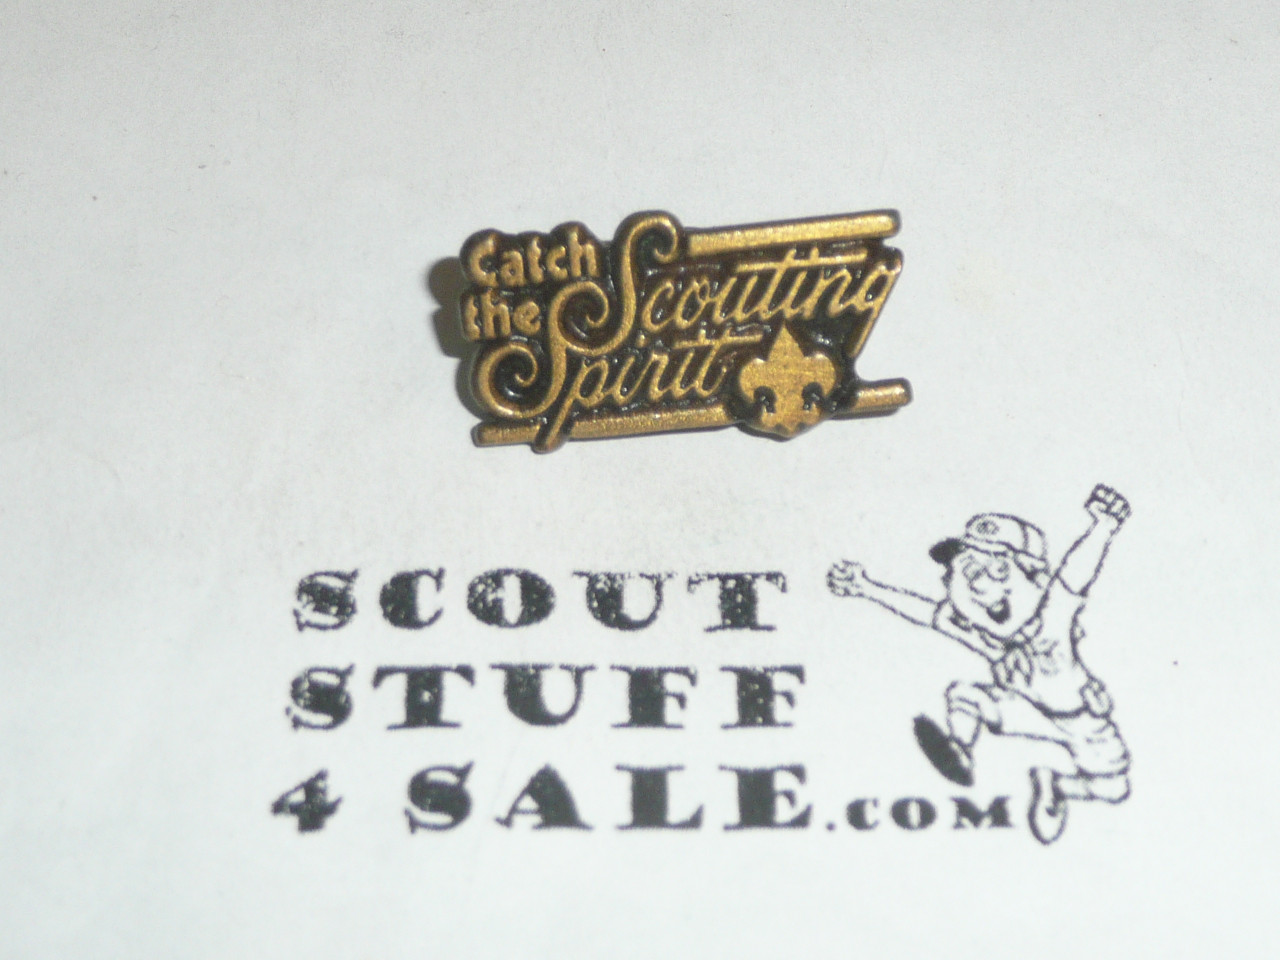 Catch the Scouting Spirit Pin